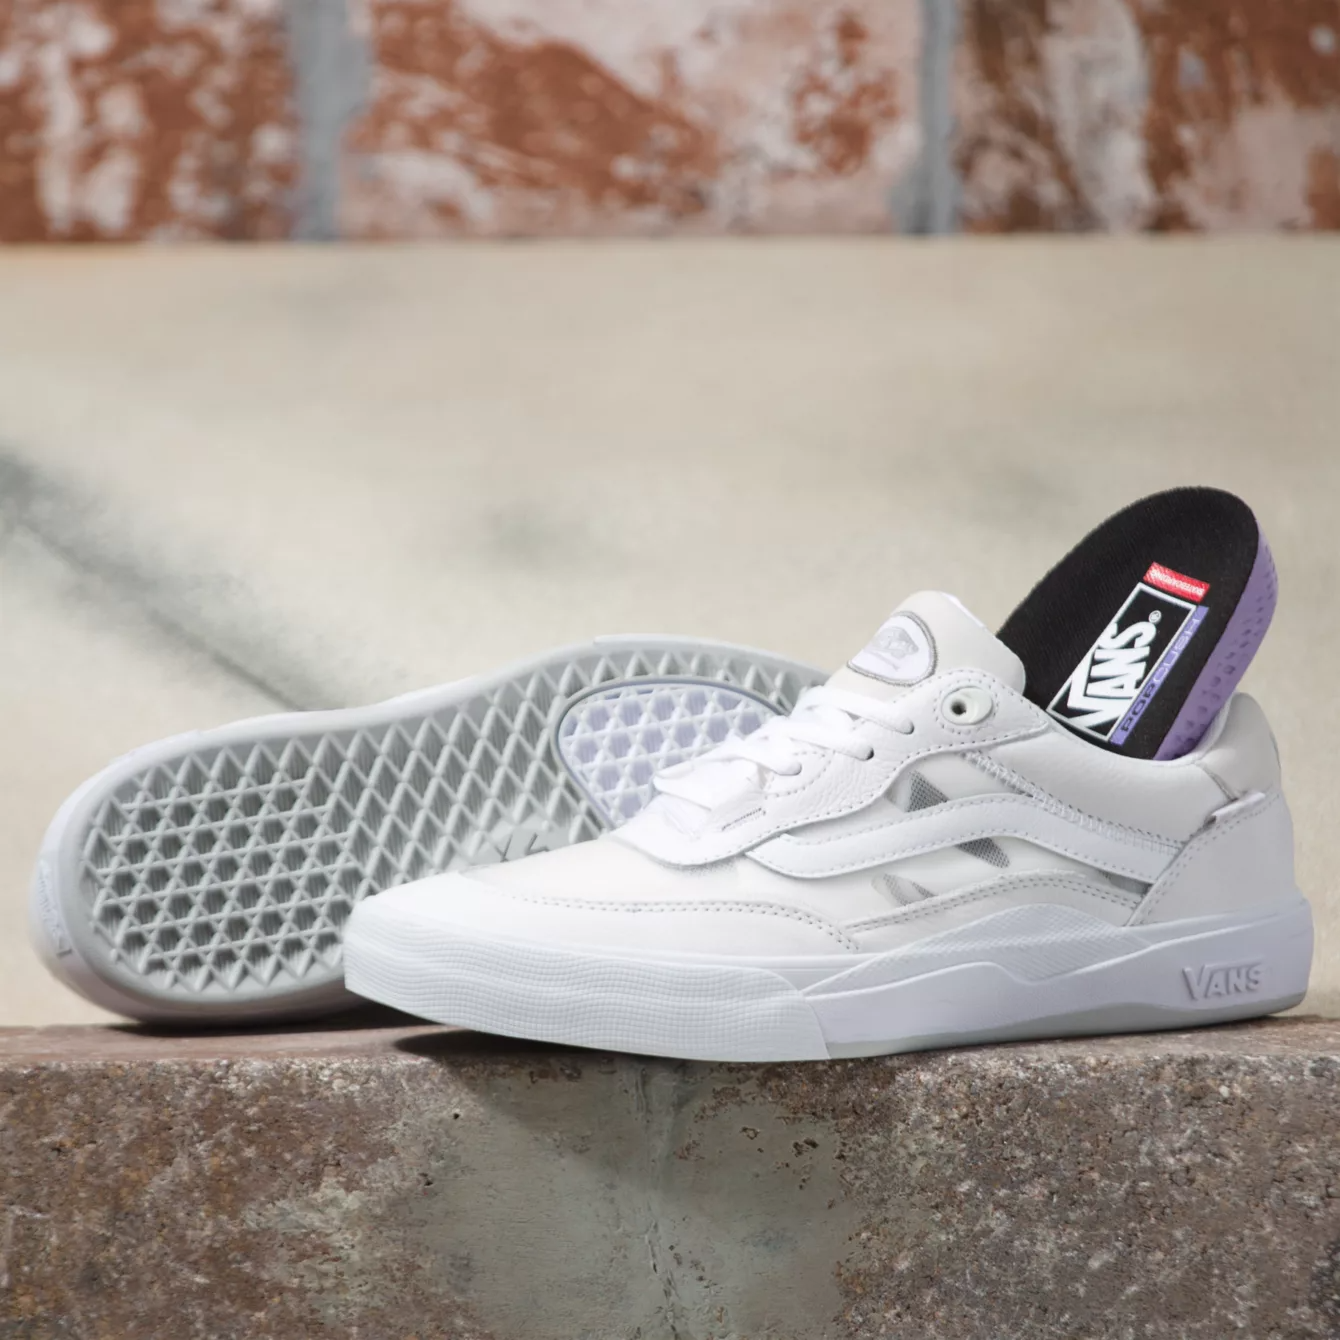 Stay cool with the Vans Wayvee Grey